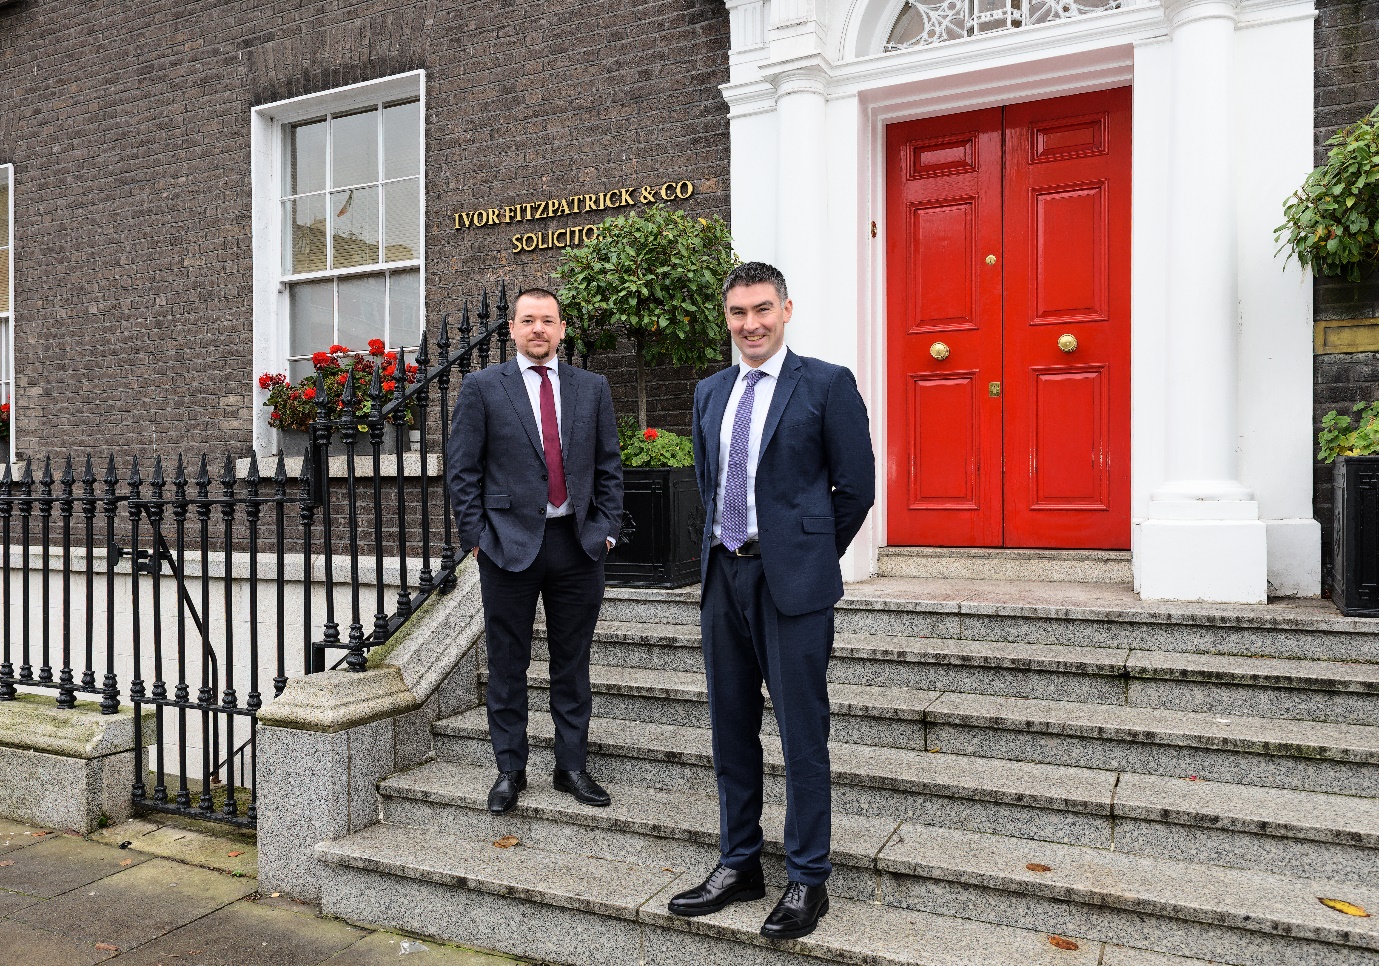 Two new partners at Ivor Fitzpatrick & Company